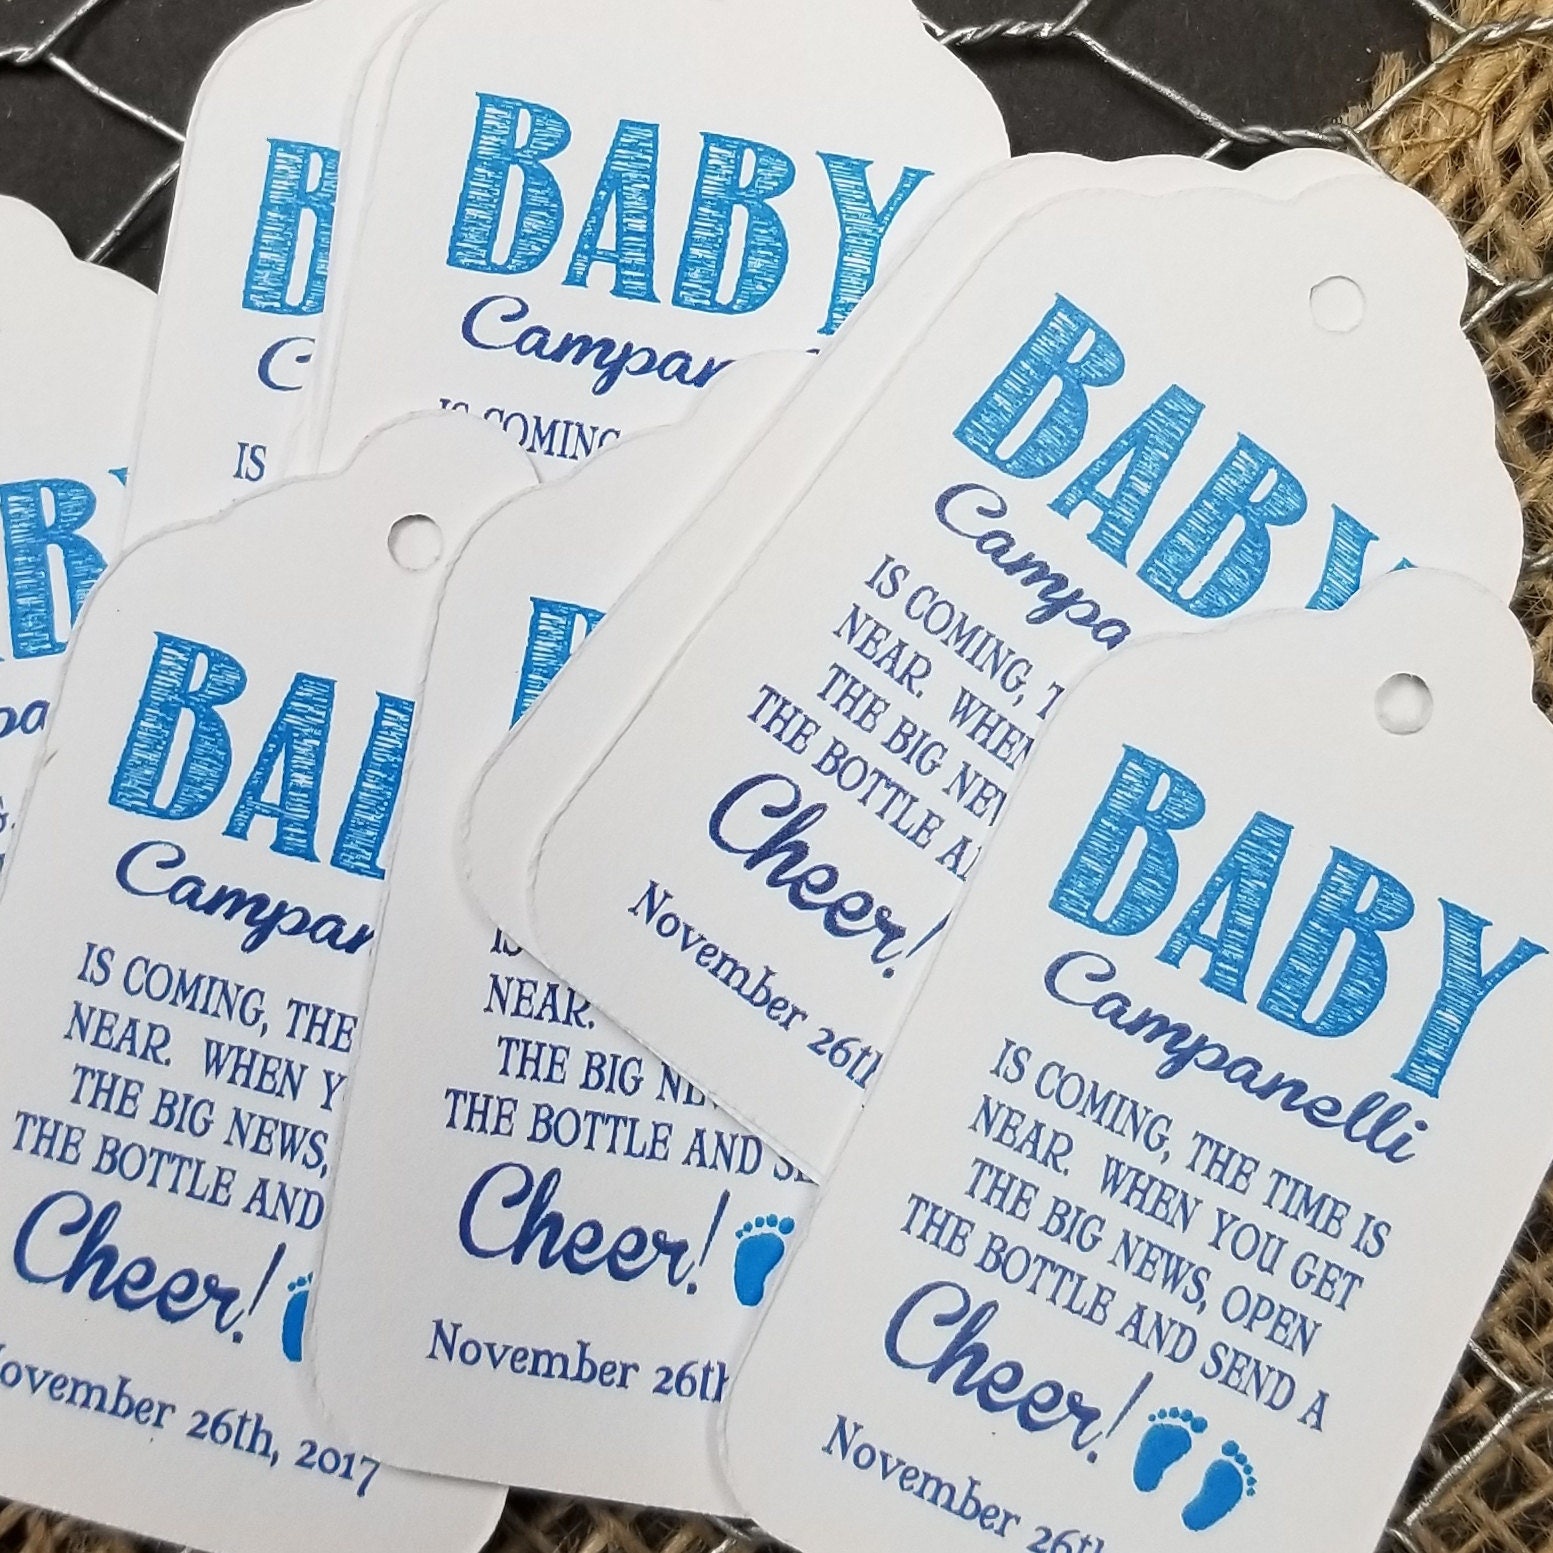 Baby is coming the Time in Near open the bottle Cheer favor tag MEDIUM Tags ...1553 x 1553